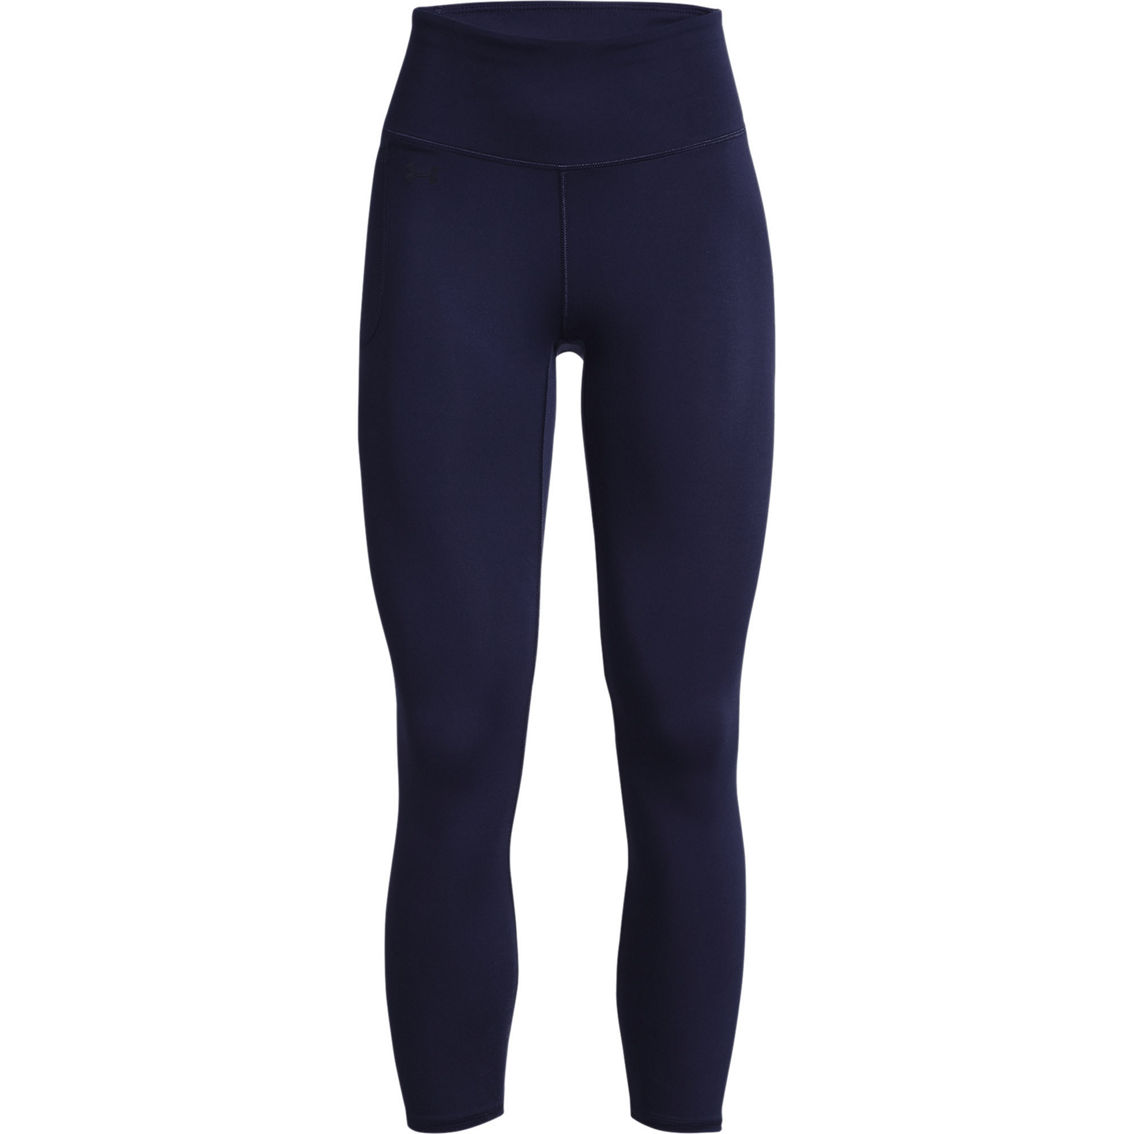 Under Armour Motion Ankle Leggings - Image 5 of 7